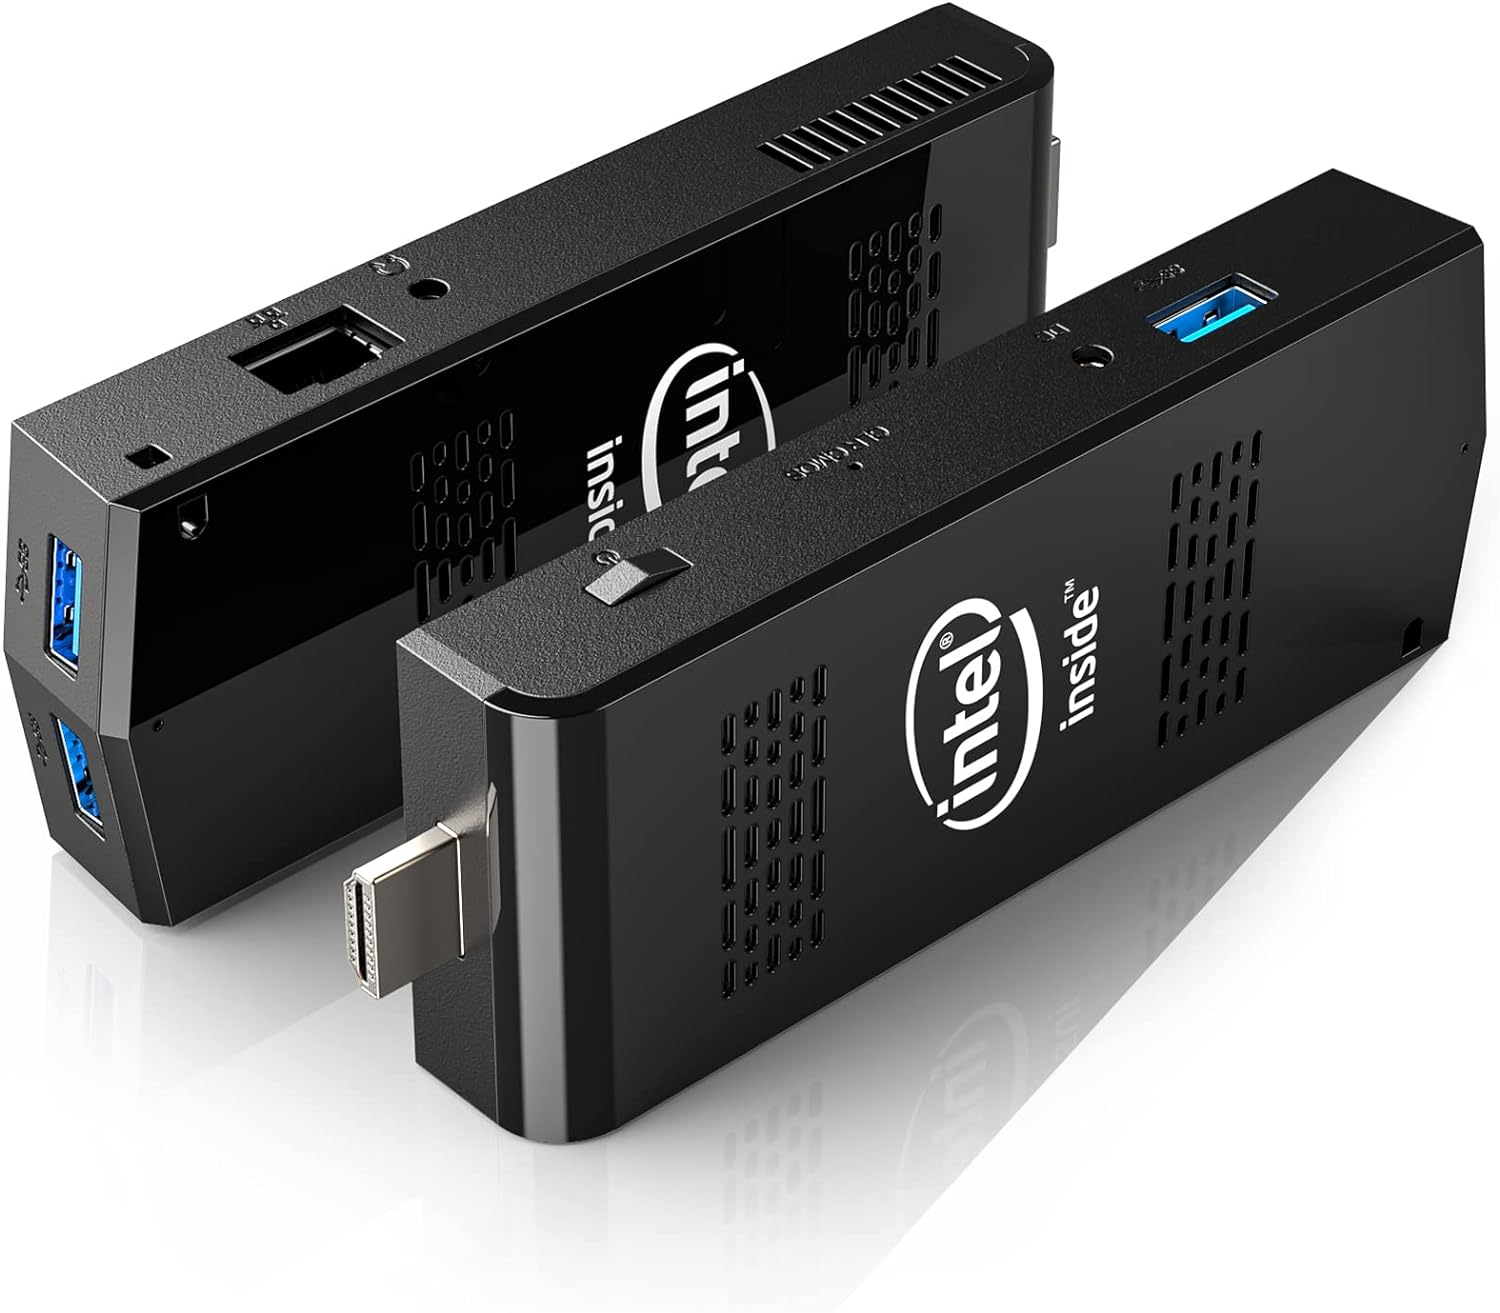 Mini PC Stick Windows 11 Pro,Intel Compute Stick with Celeron N4020(Up to 2.8GHz) Equipped 8GB RAM 512GB M.2 SSD,Micro Computer Support 4K@60Hz Output/WiFi/BT/Gigabit Ethernet